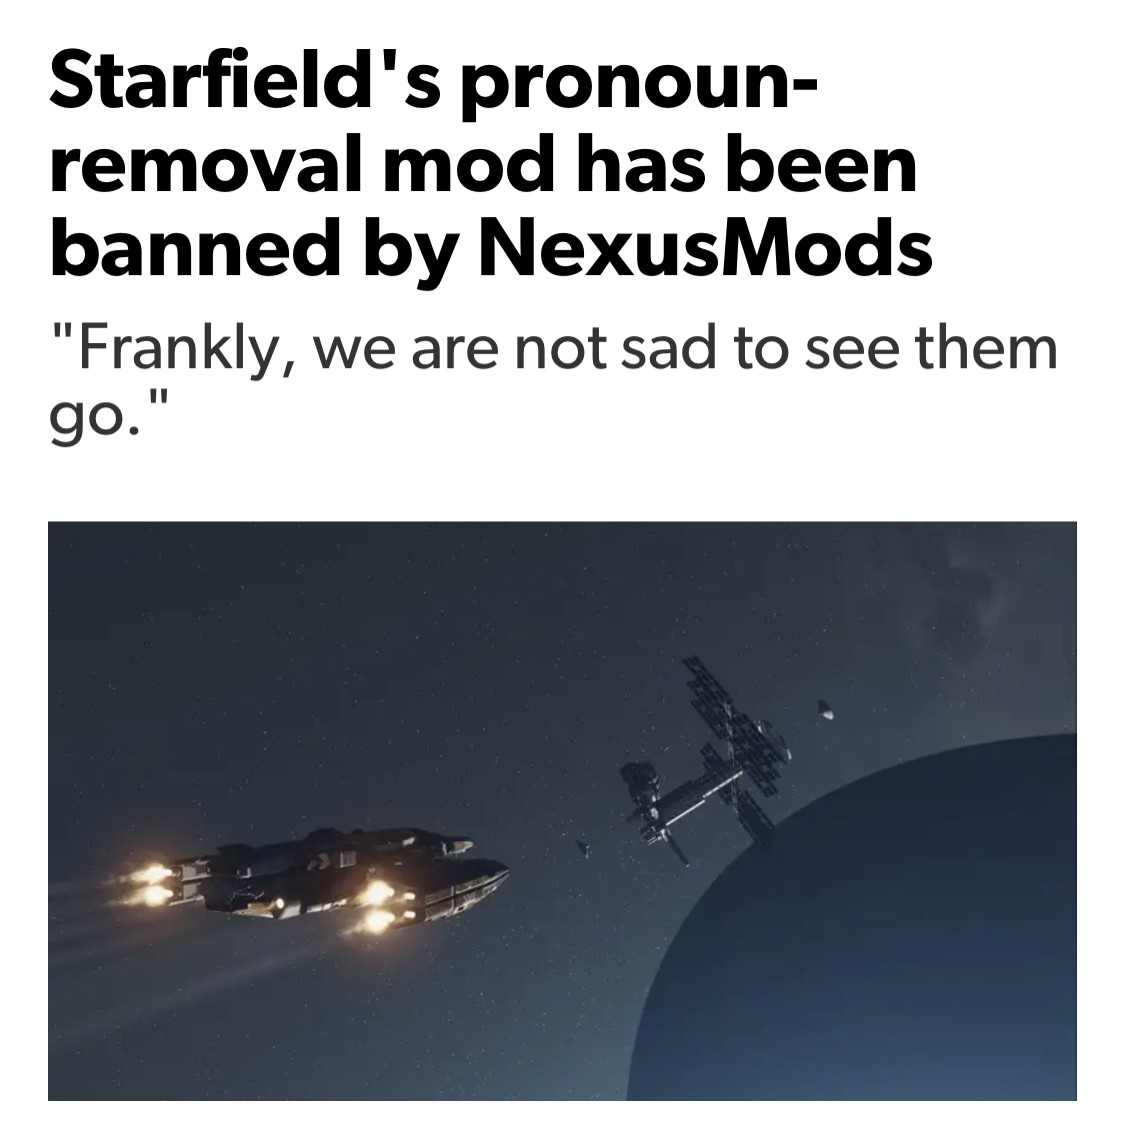 Starfield's pronoun-removal mod has been banned by NexusMods